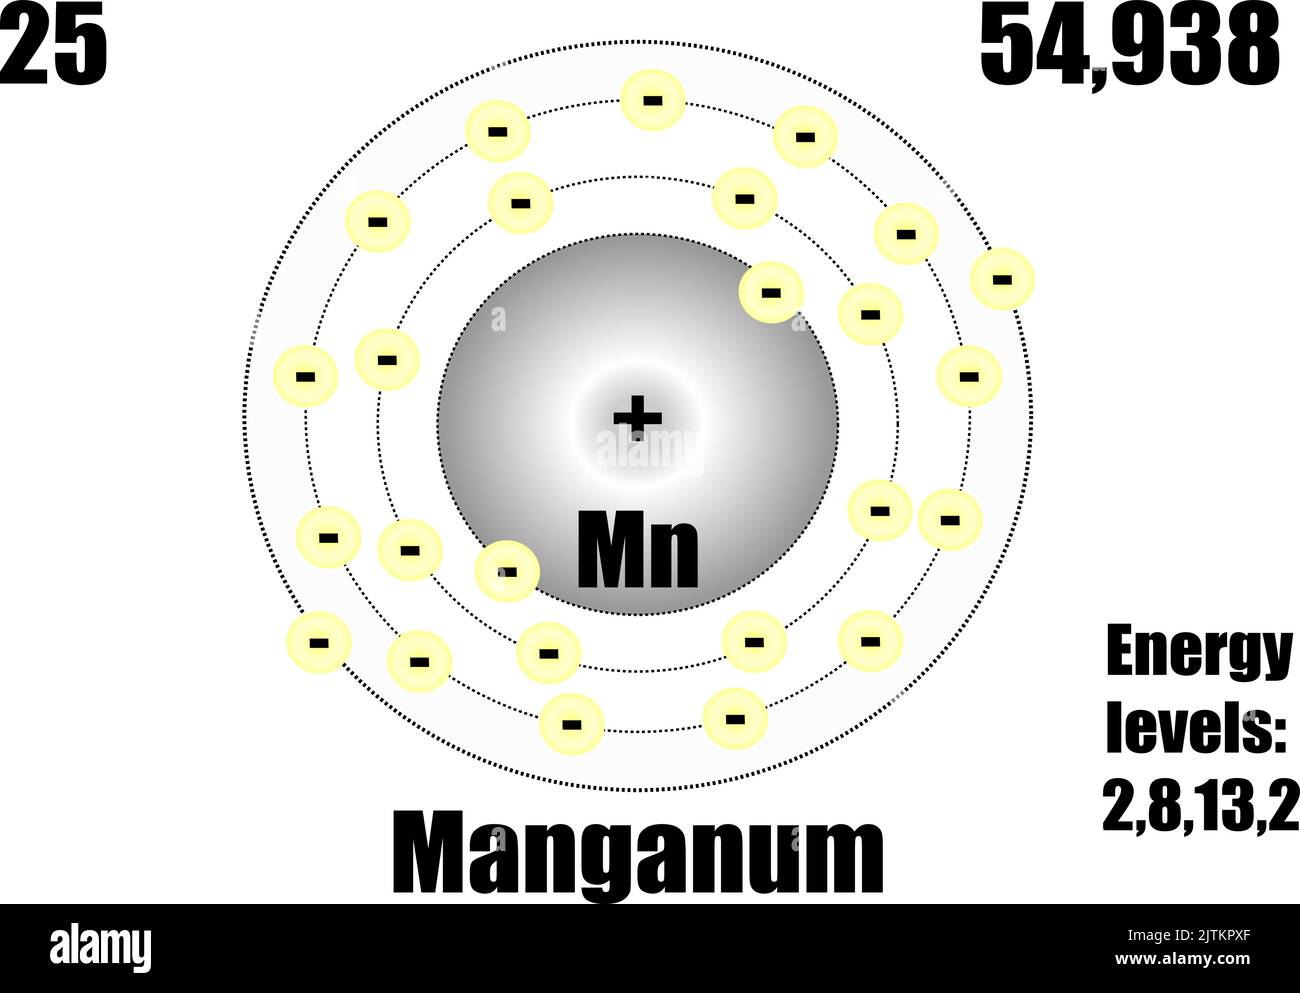 Manganese atom, with mass and energy levels. Vector illustration Stock Vector